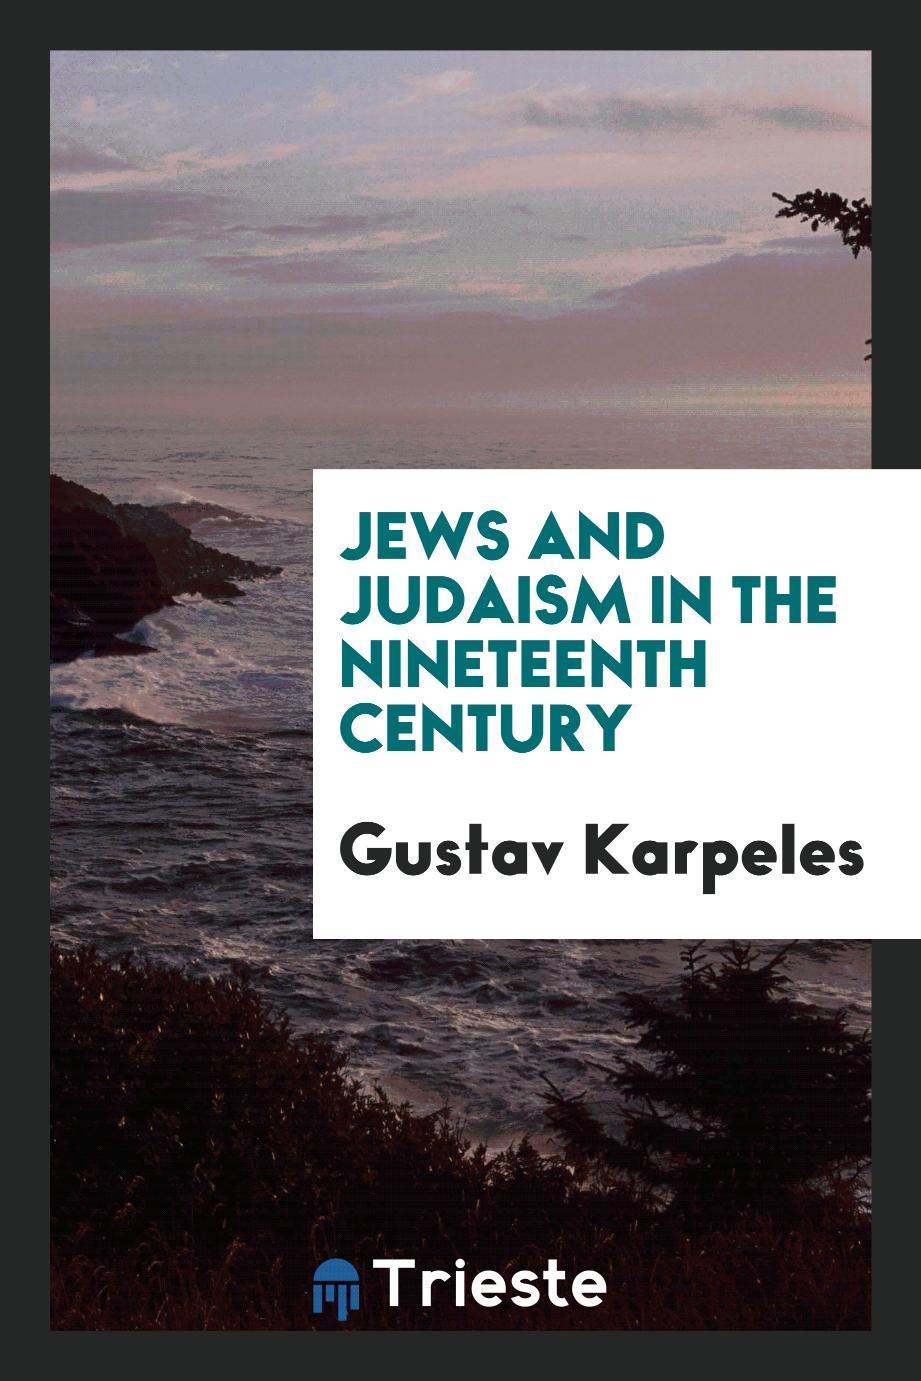 Jews and Judaism in the nineteenth century